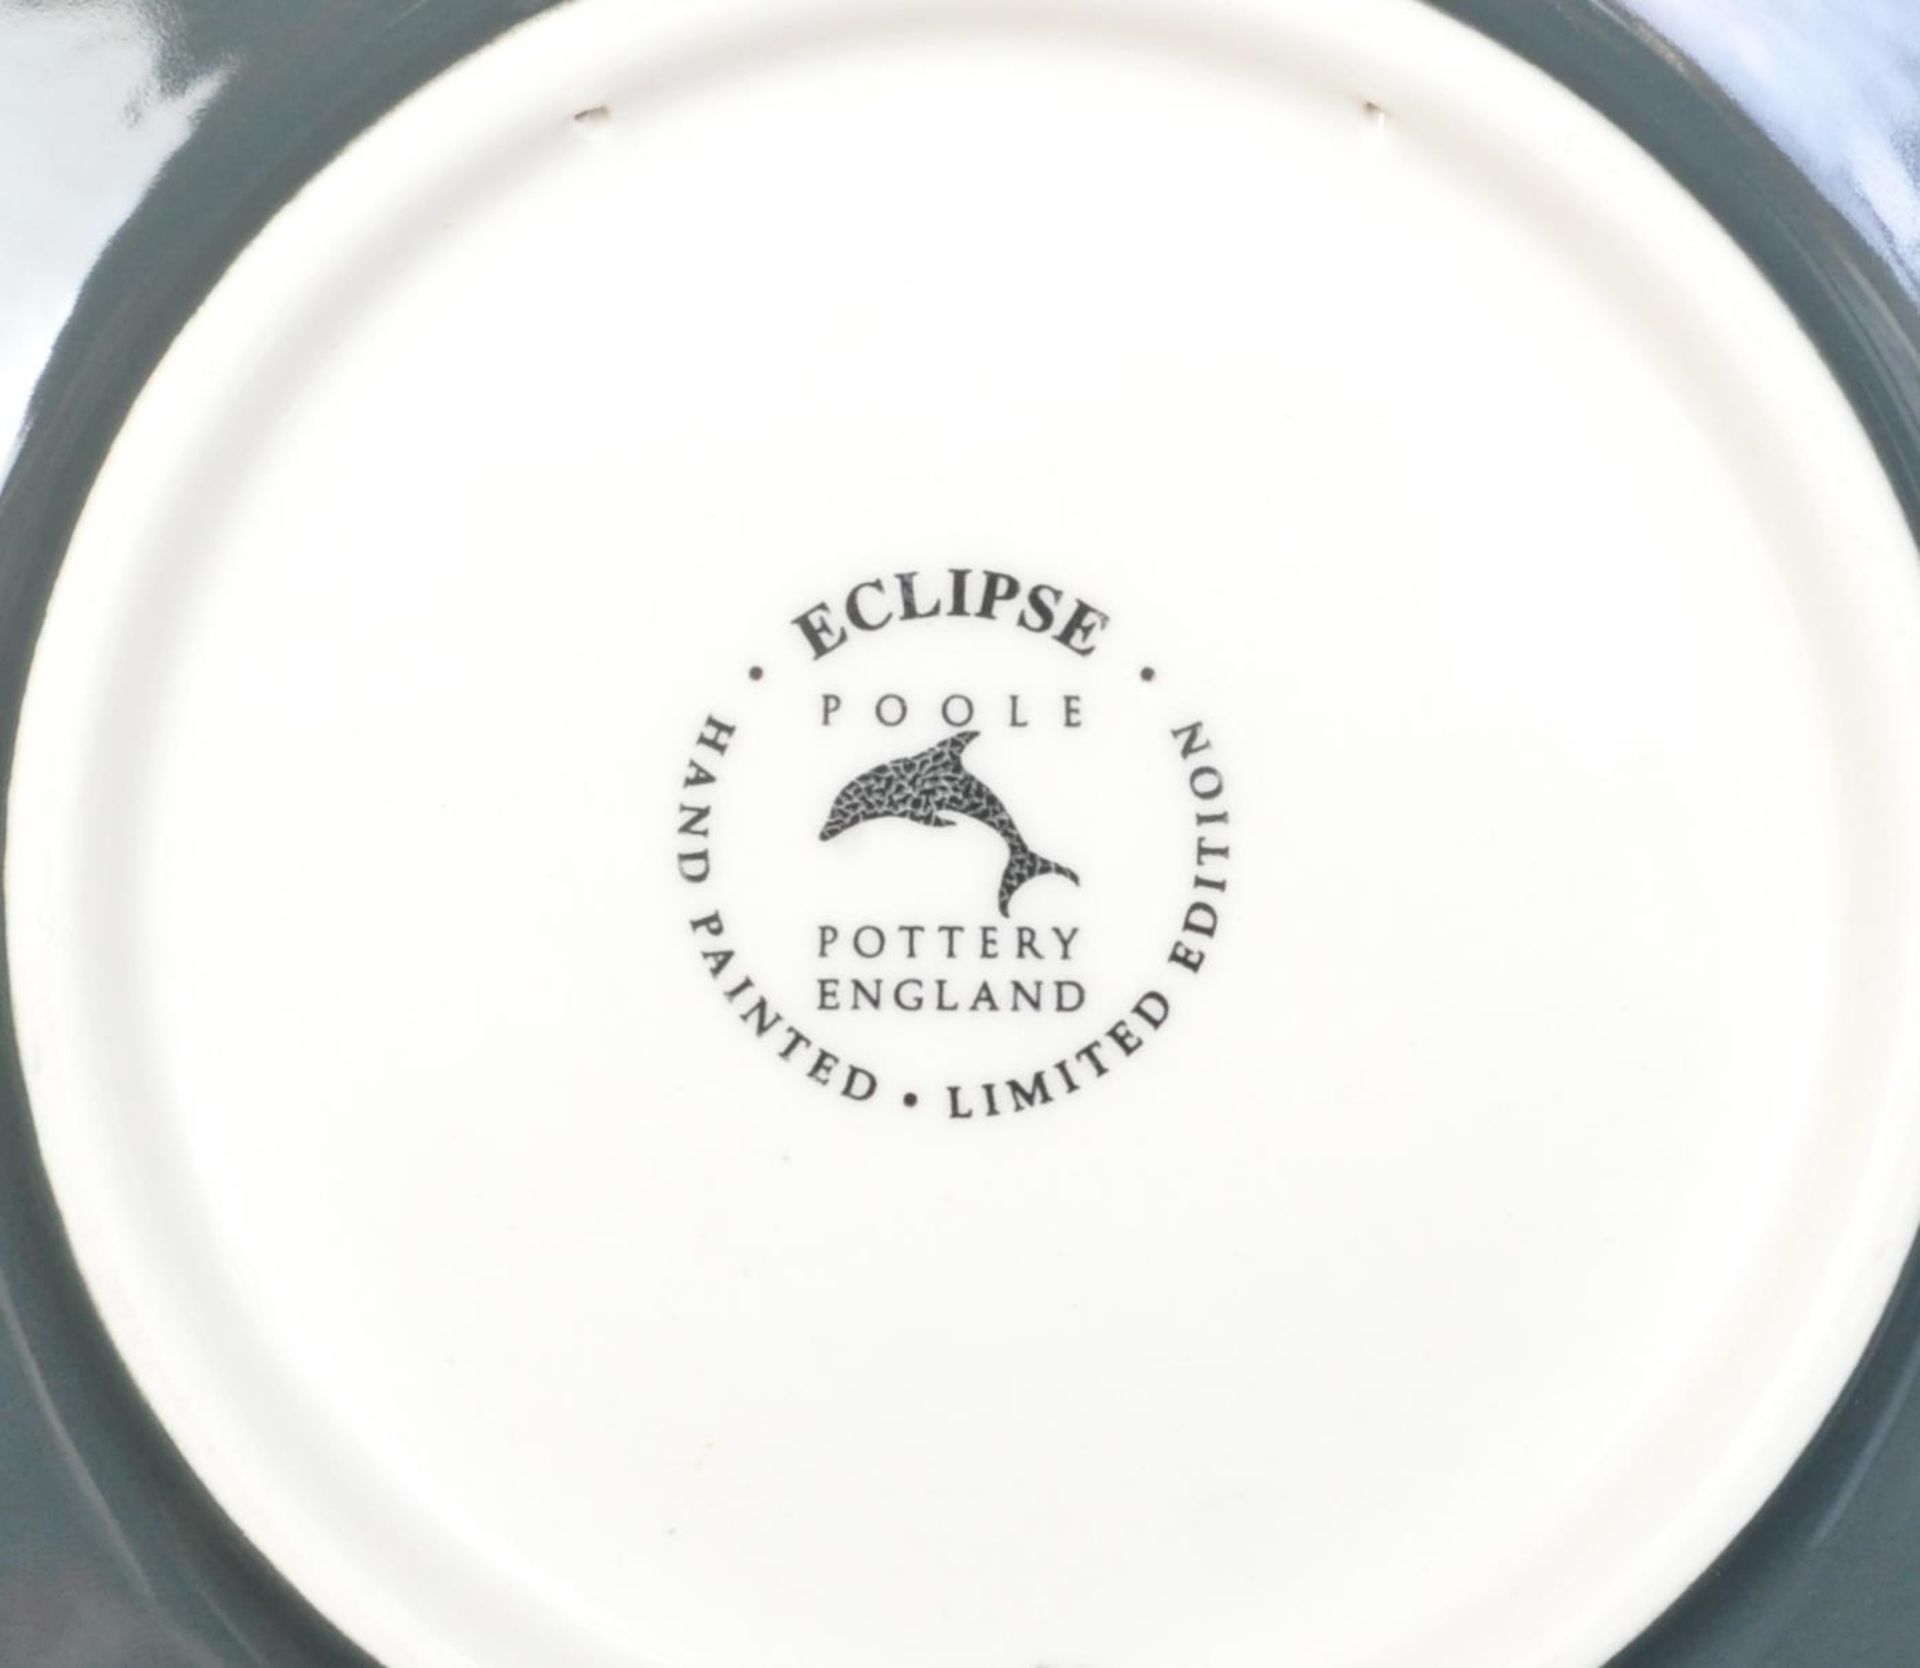 POOLE POTTERY ECLIPSE PLATE - LIMITED EDITION - ALEX CLARK - Image 2 of 5